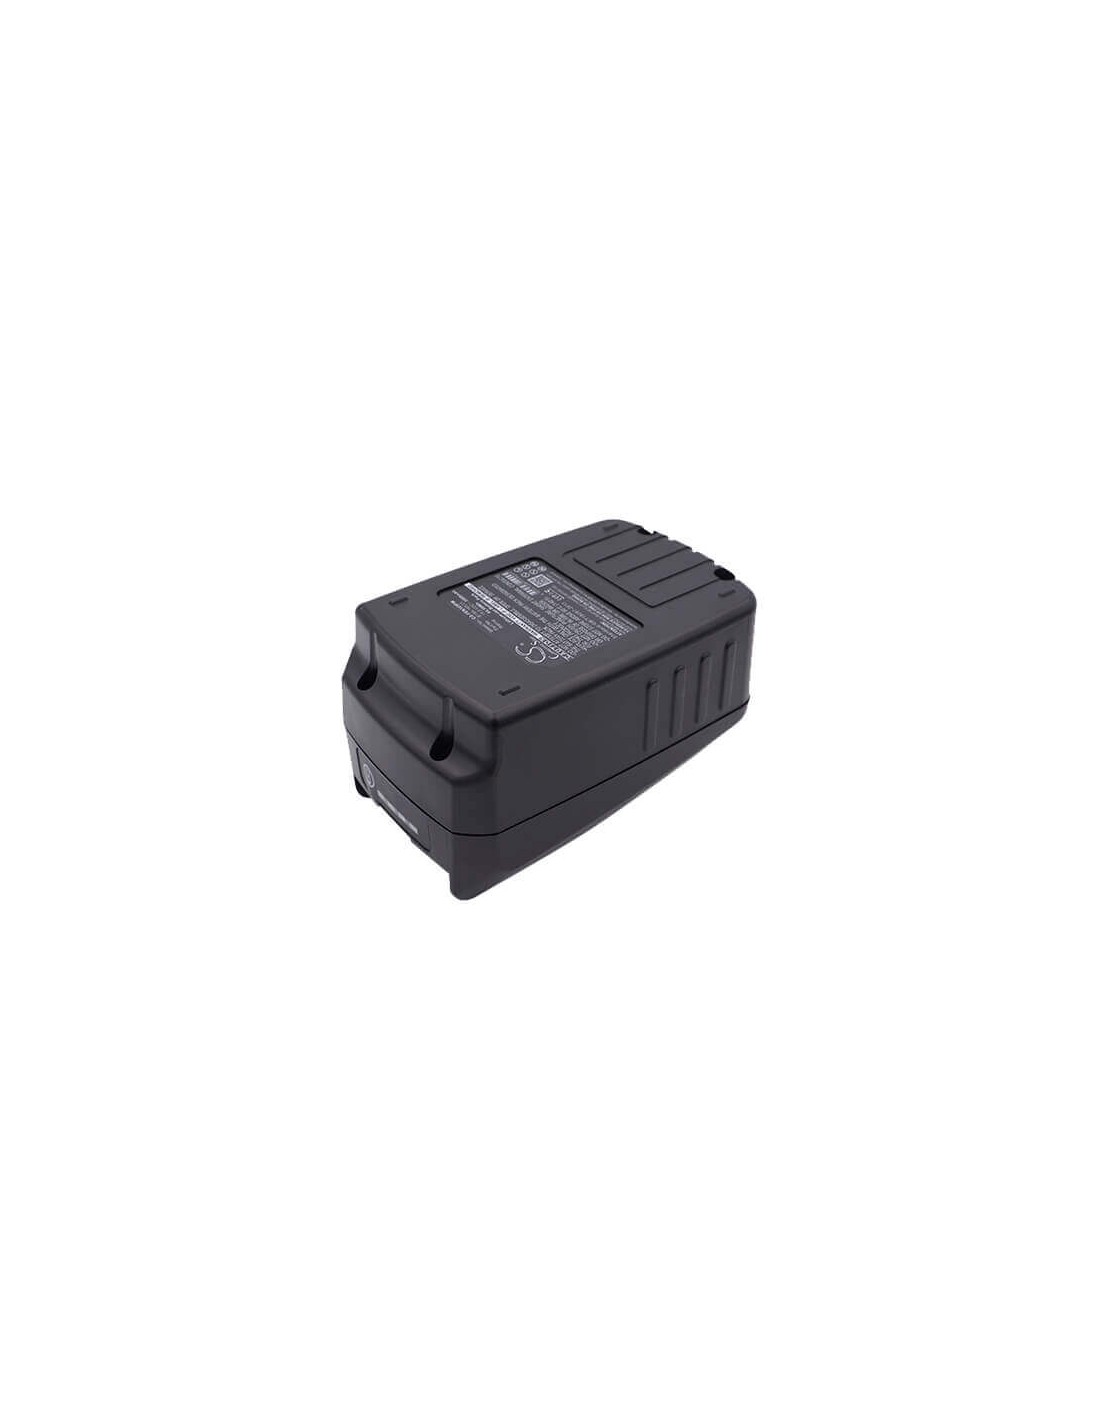 Battery for Fein, Abs 18, Abs 18 C, Asb 18, Asb 18 C 18V, 3000mAh - 54.00Wh